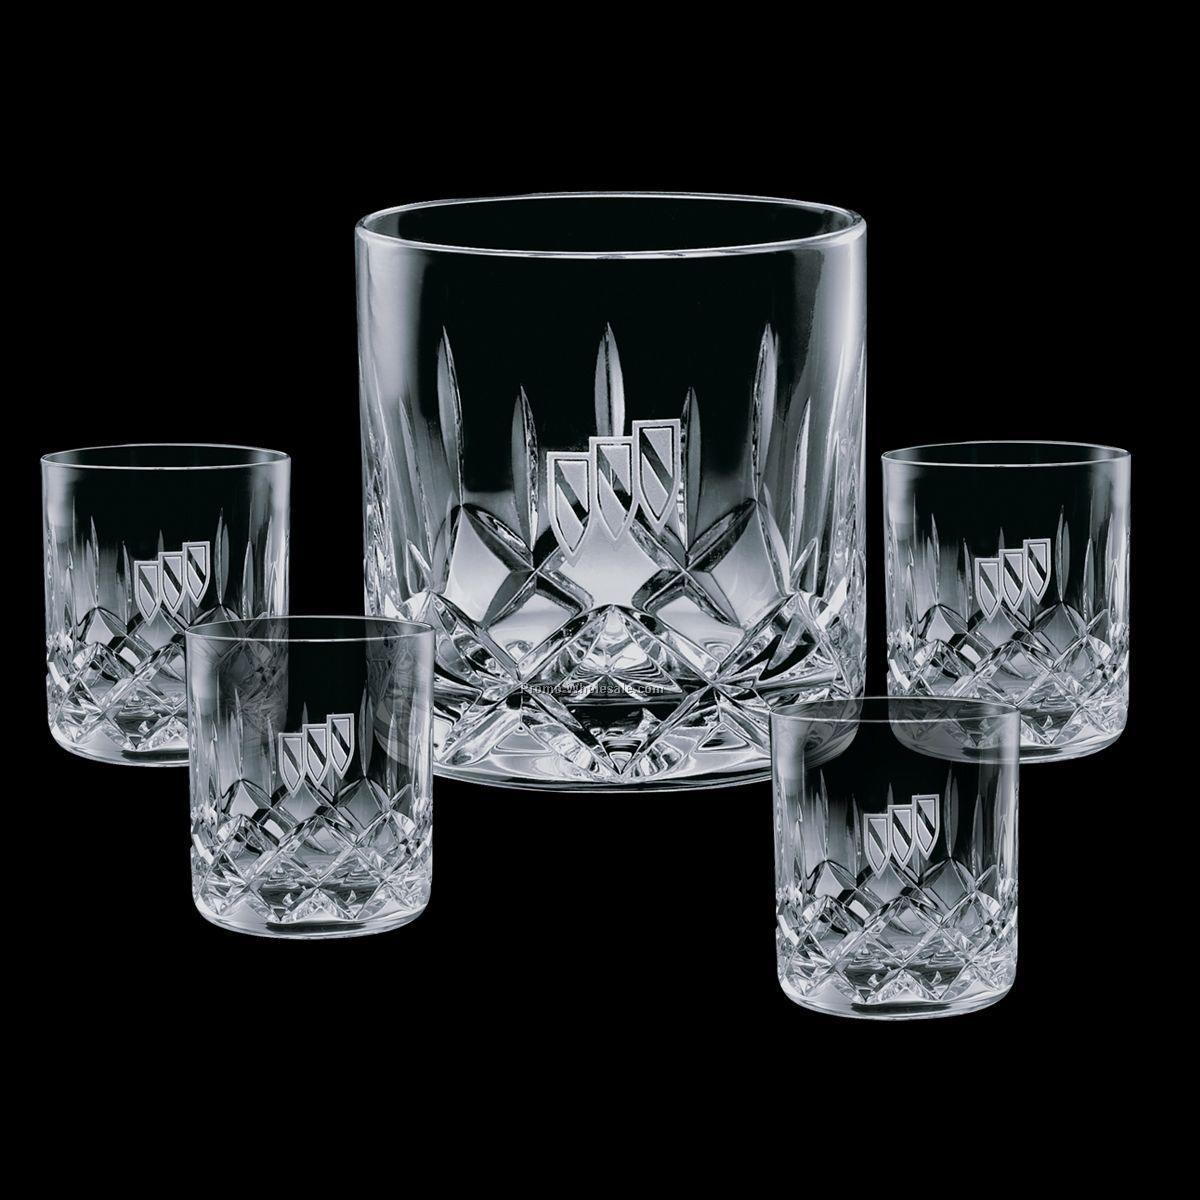 7" Crystal Denby Ice Bucket And 4 On-the-rocks Glasses